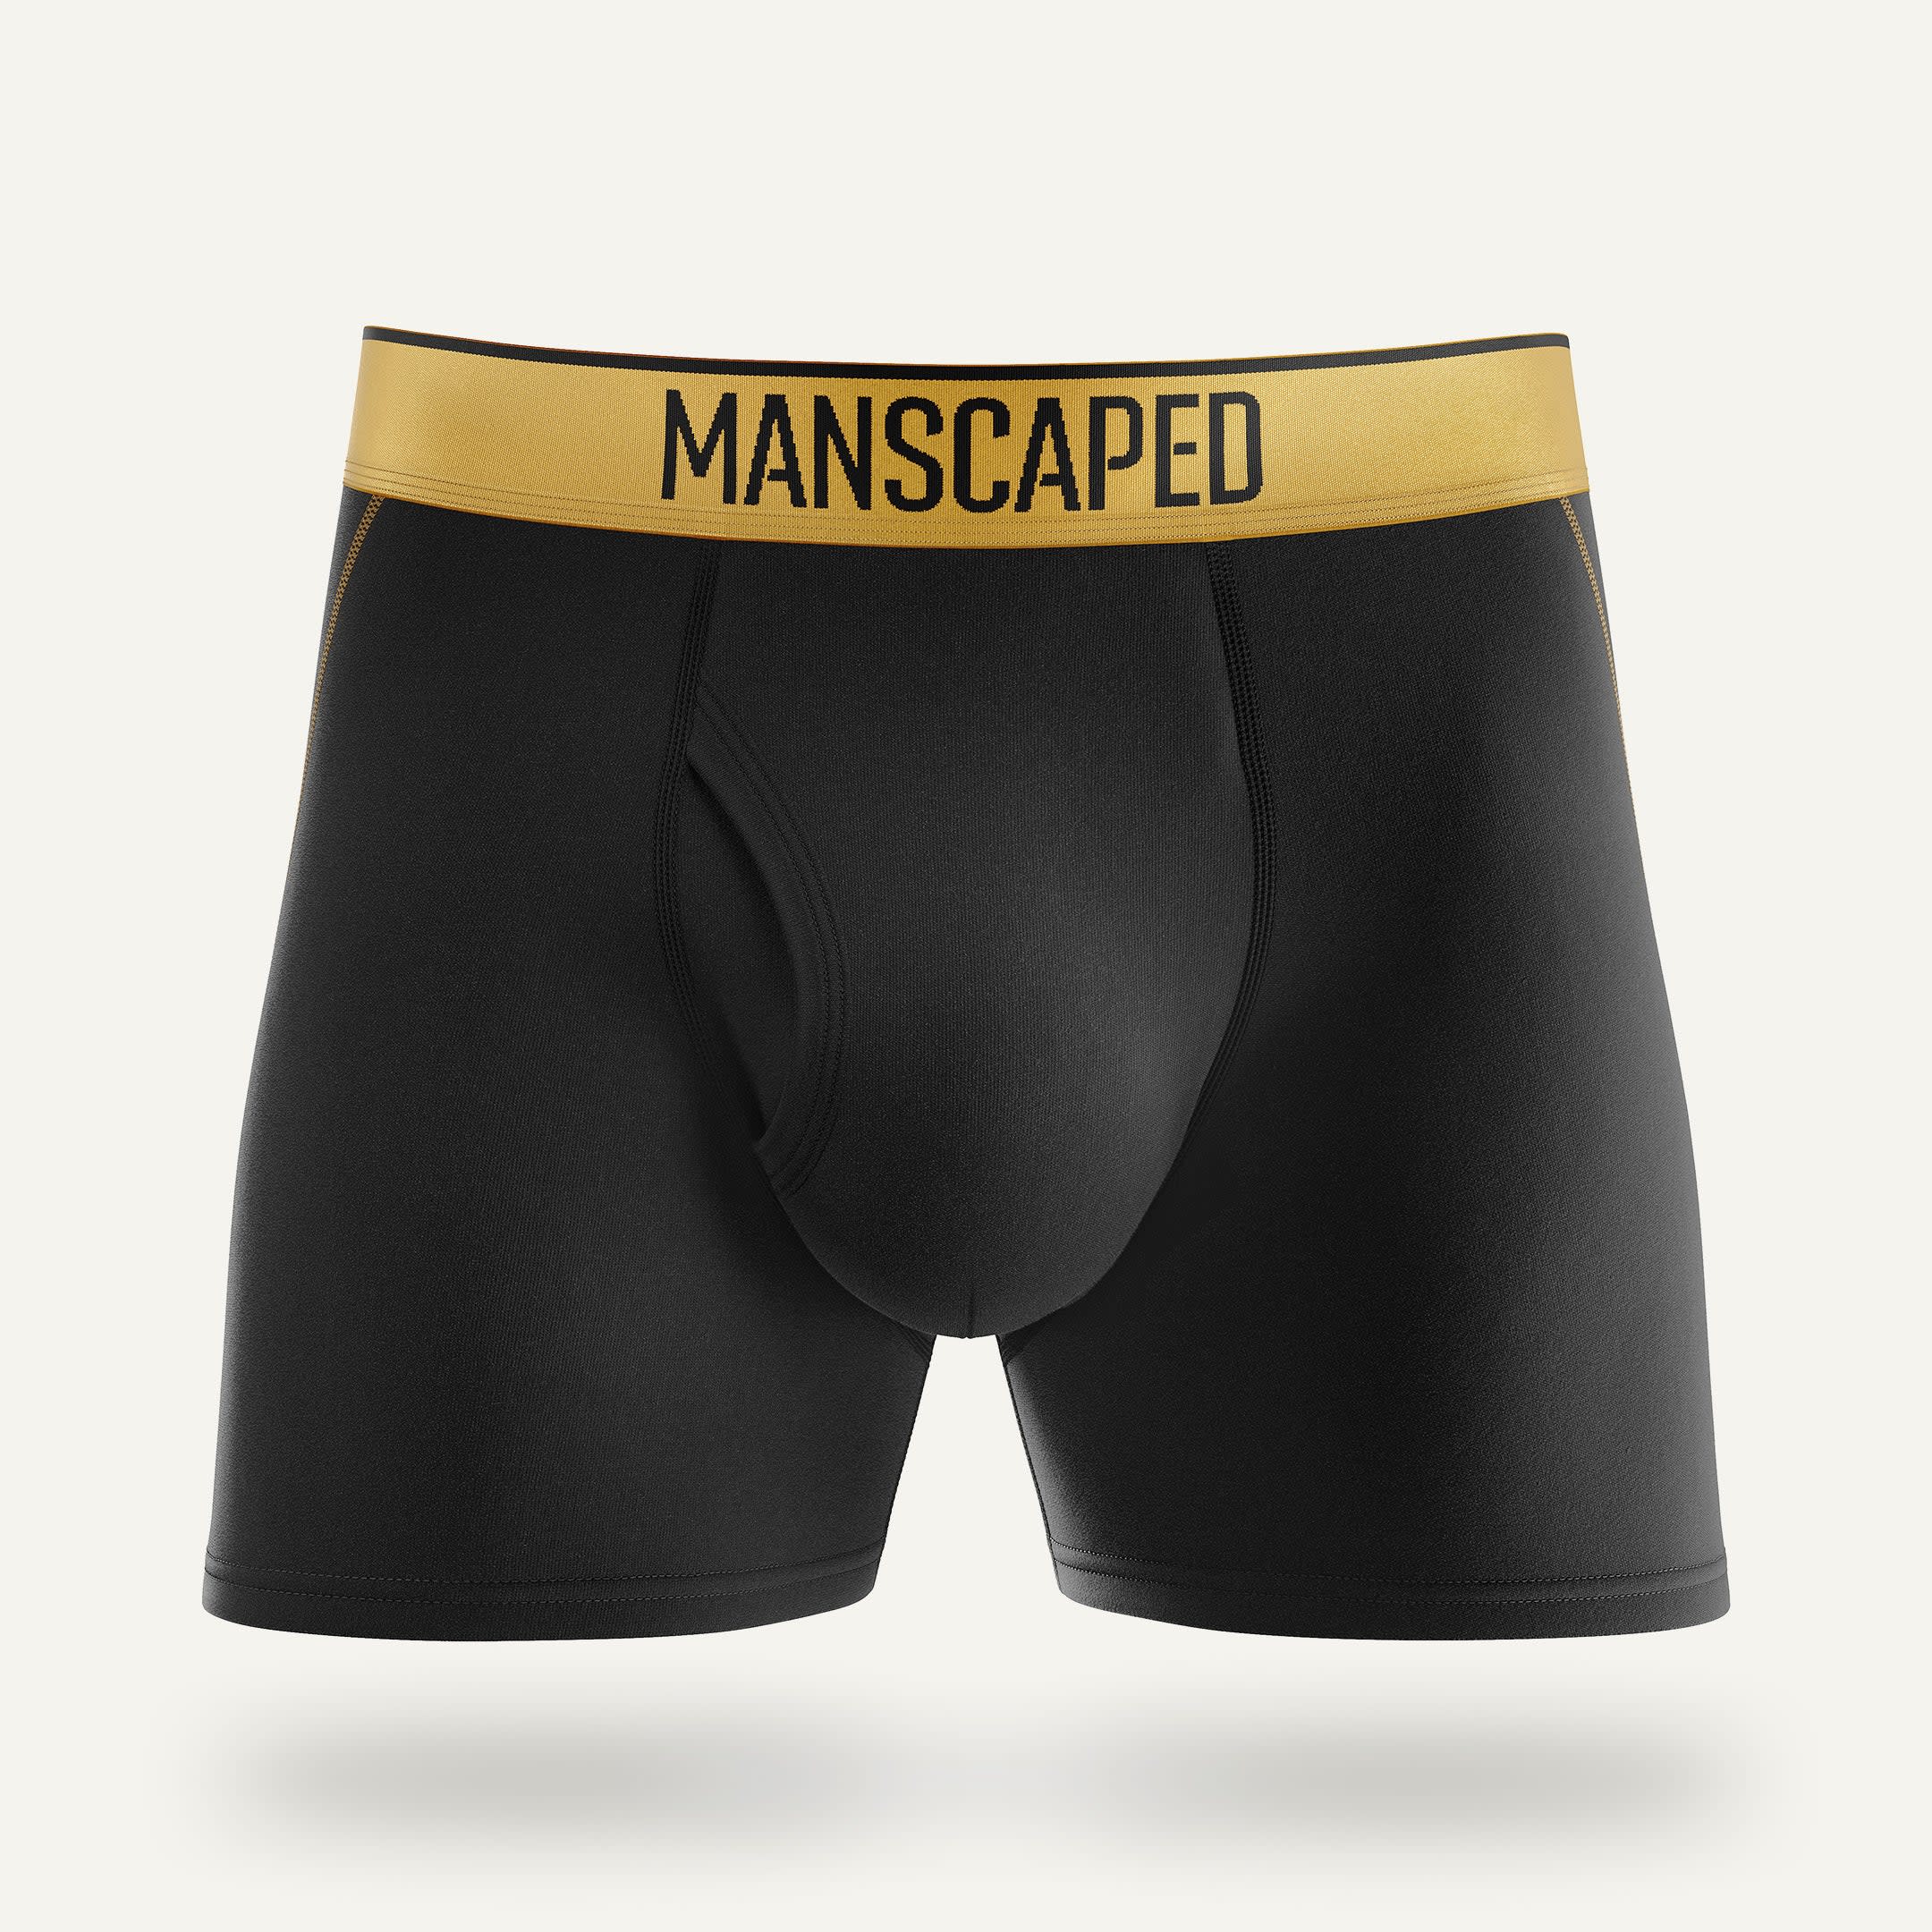 A Guide to Male&#039;s Boxer Briefs - Manscaped